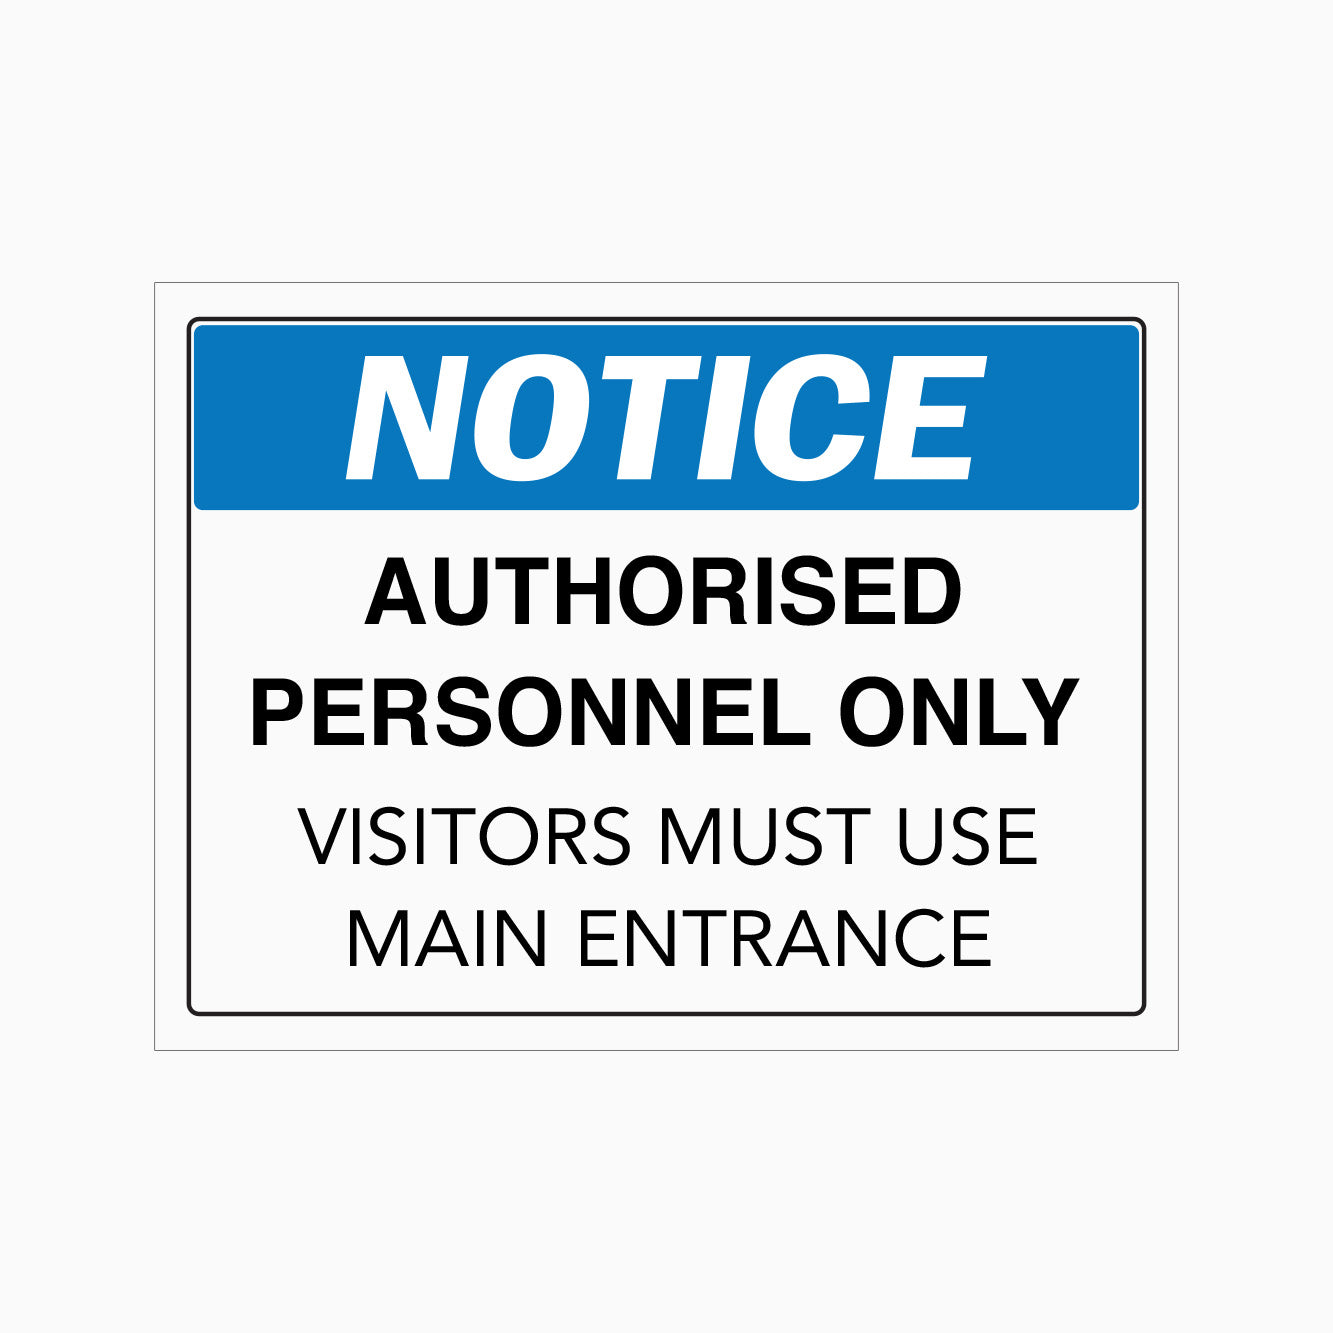 NOTICE AUTHORISED PERSONNEL ONLY VISITORS MUST USE MAIN ENTRANCE SIGN